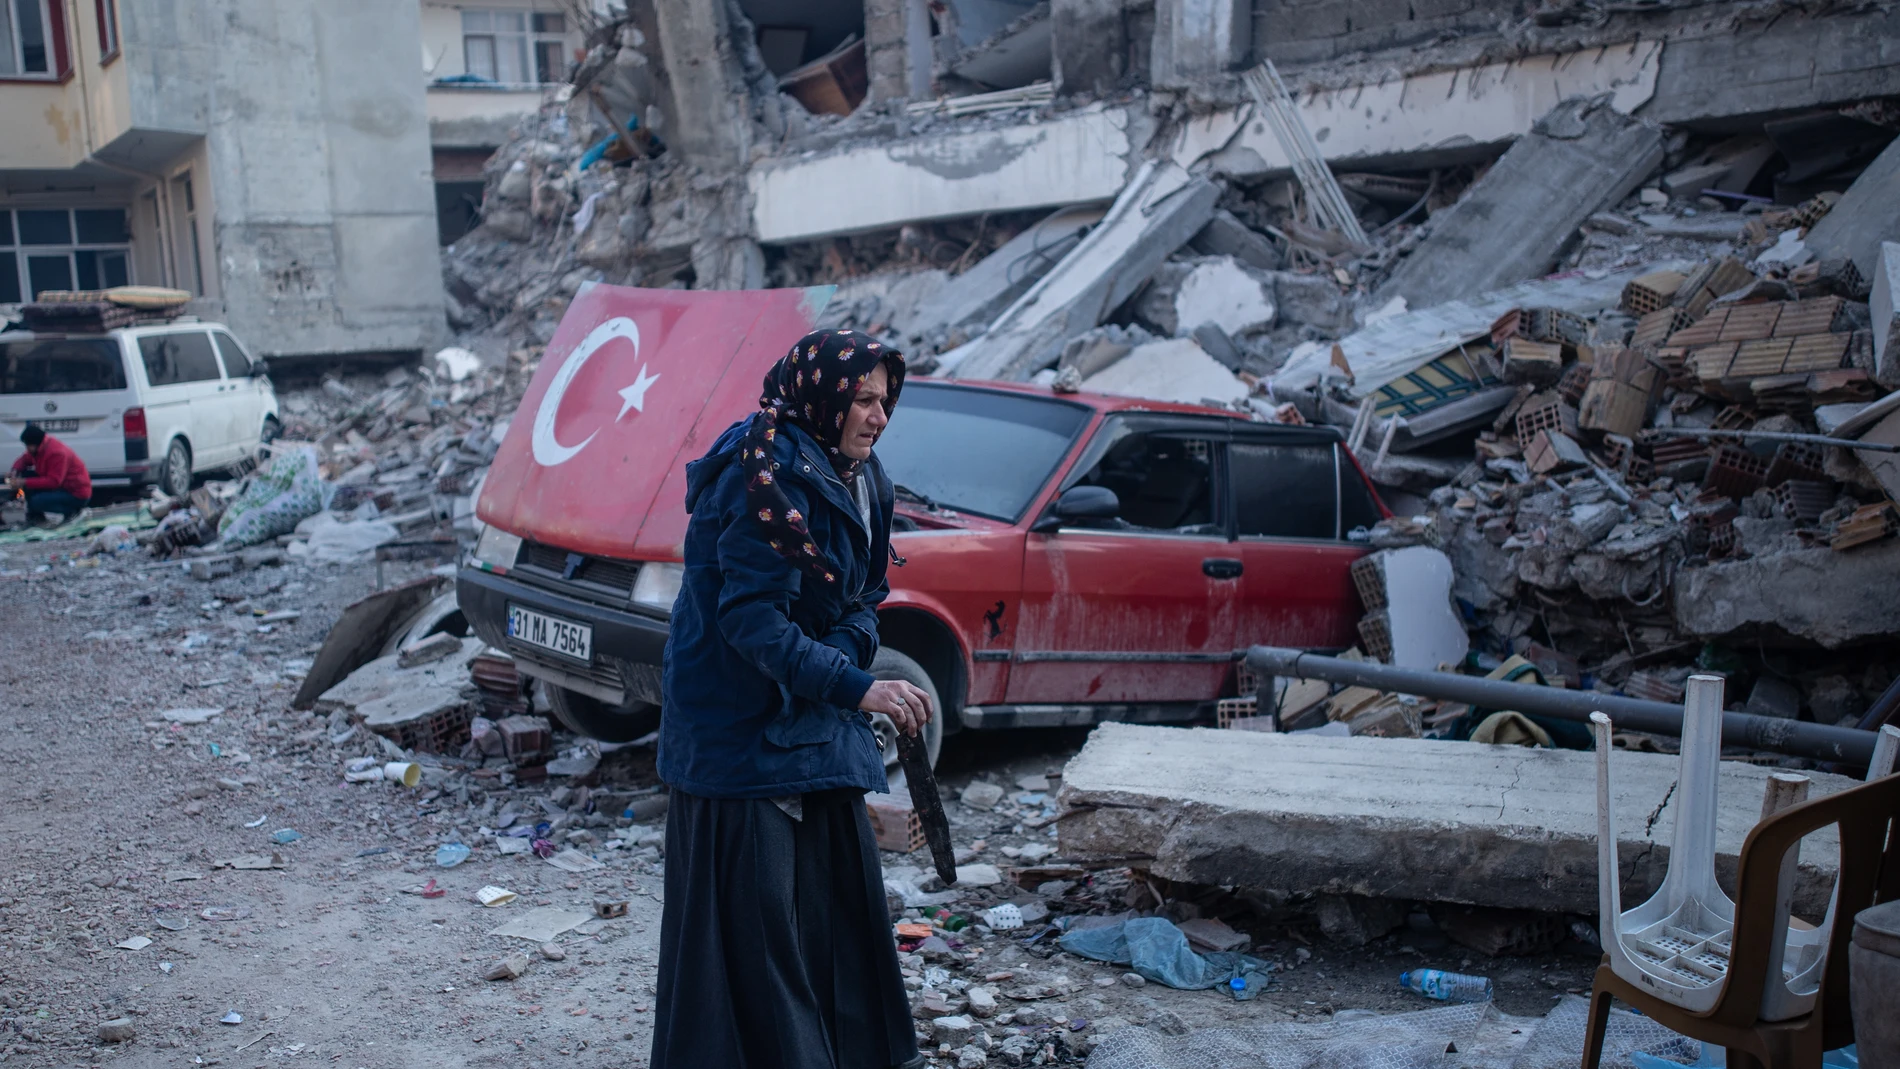 Hatay (Turkey), 13/02/2023.- A woman stands near the rubble of a collapsed building and the wreckage of a car in the aftermath of a powerful earthquake in Hatay, Turkey, 13 February 2023. More than 35,000 people have died and thousands more are injured after two major earthquakes struck southern Turkey and northern Syria on 06 February. Authorities fear the death toll will keep climbing as rescuers look for survivors across the region. (Terremoto/sismo, Siria, Turquía, Estados Unidos) EFE/EPA/STR 